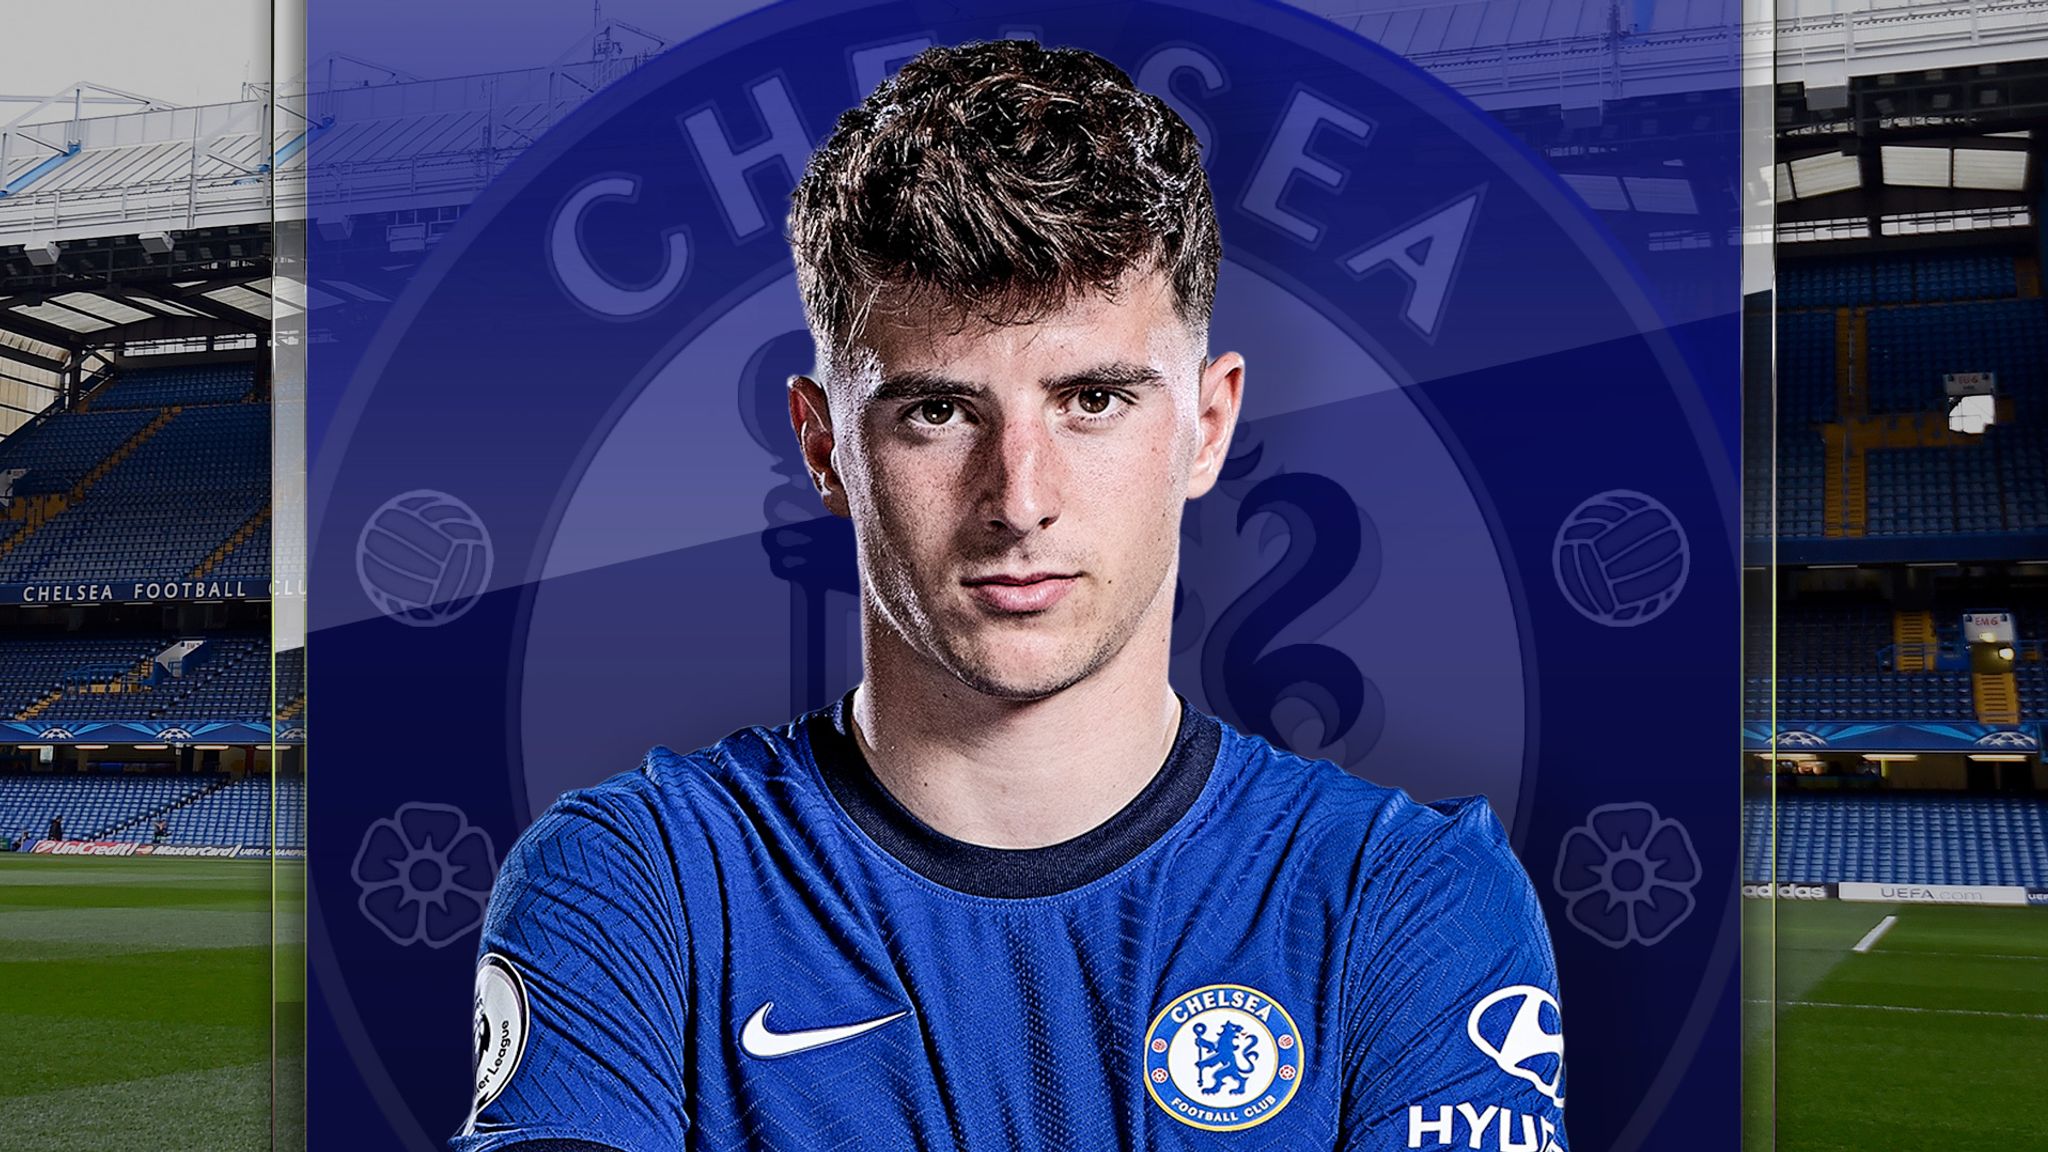 Chelsea Midfielder Mason Mount Set To Star In Champions League Semi Final Second Leg With Real Madrid